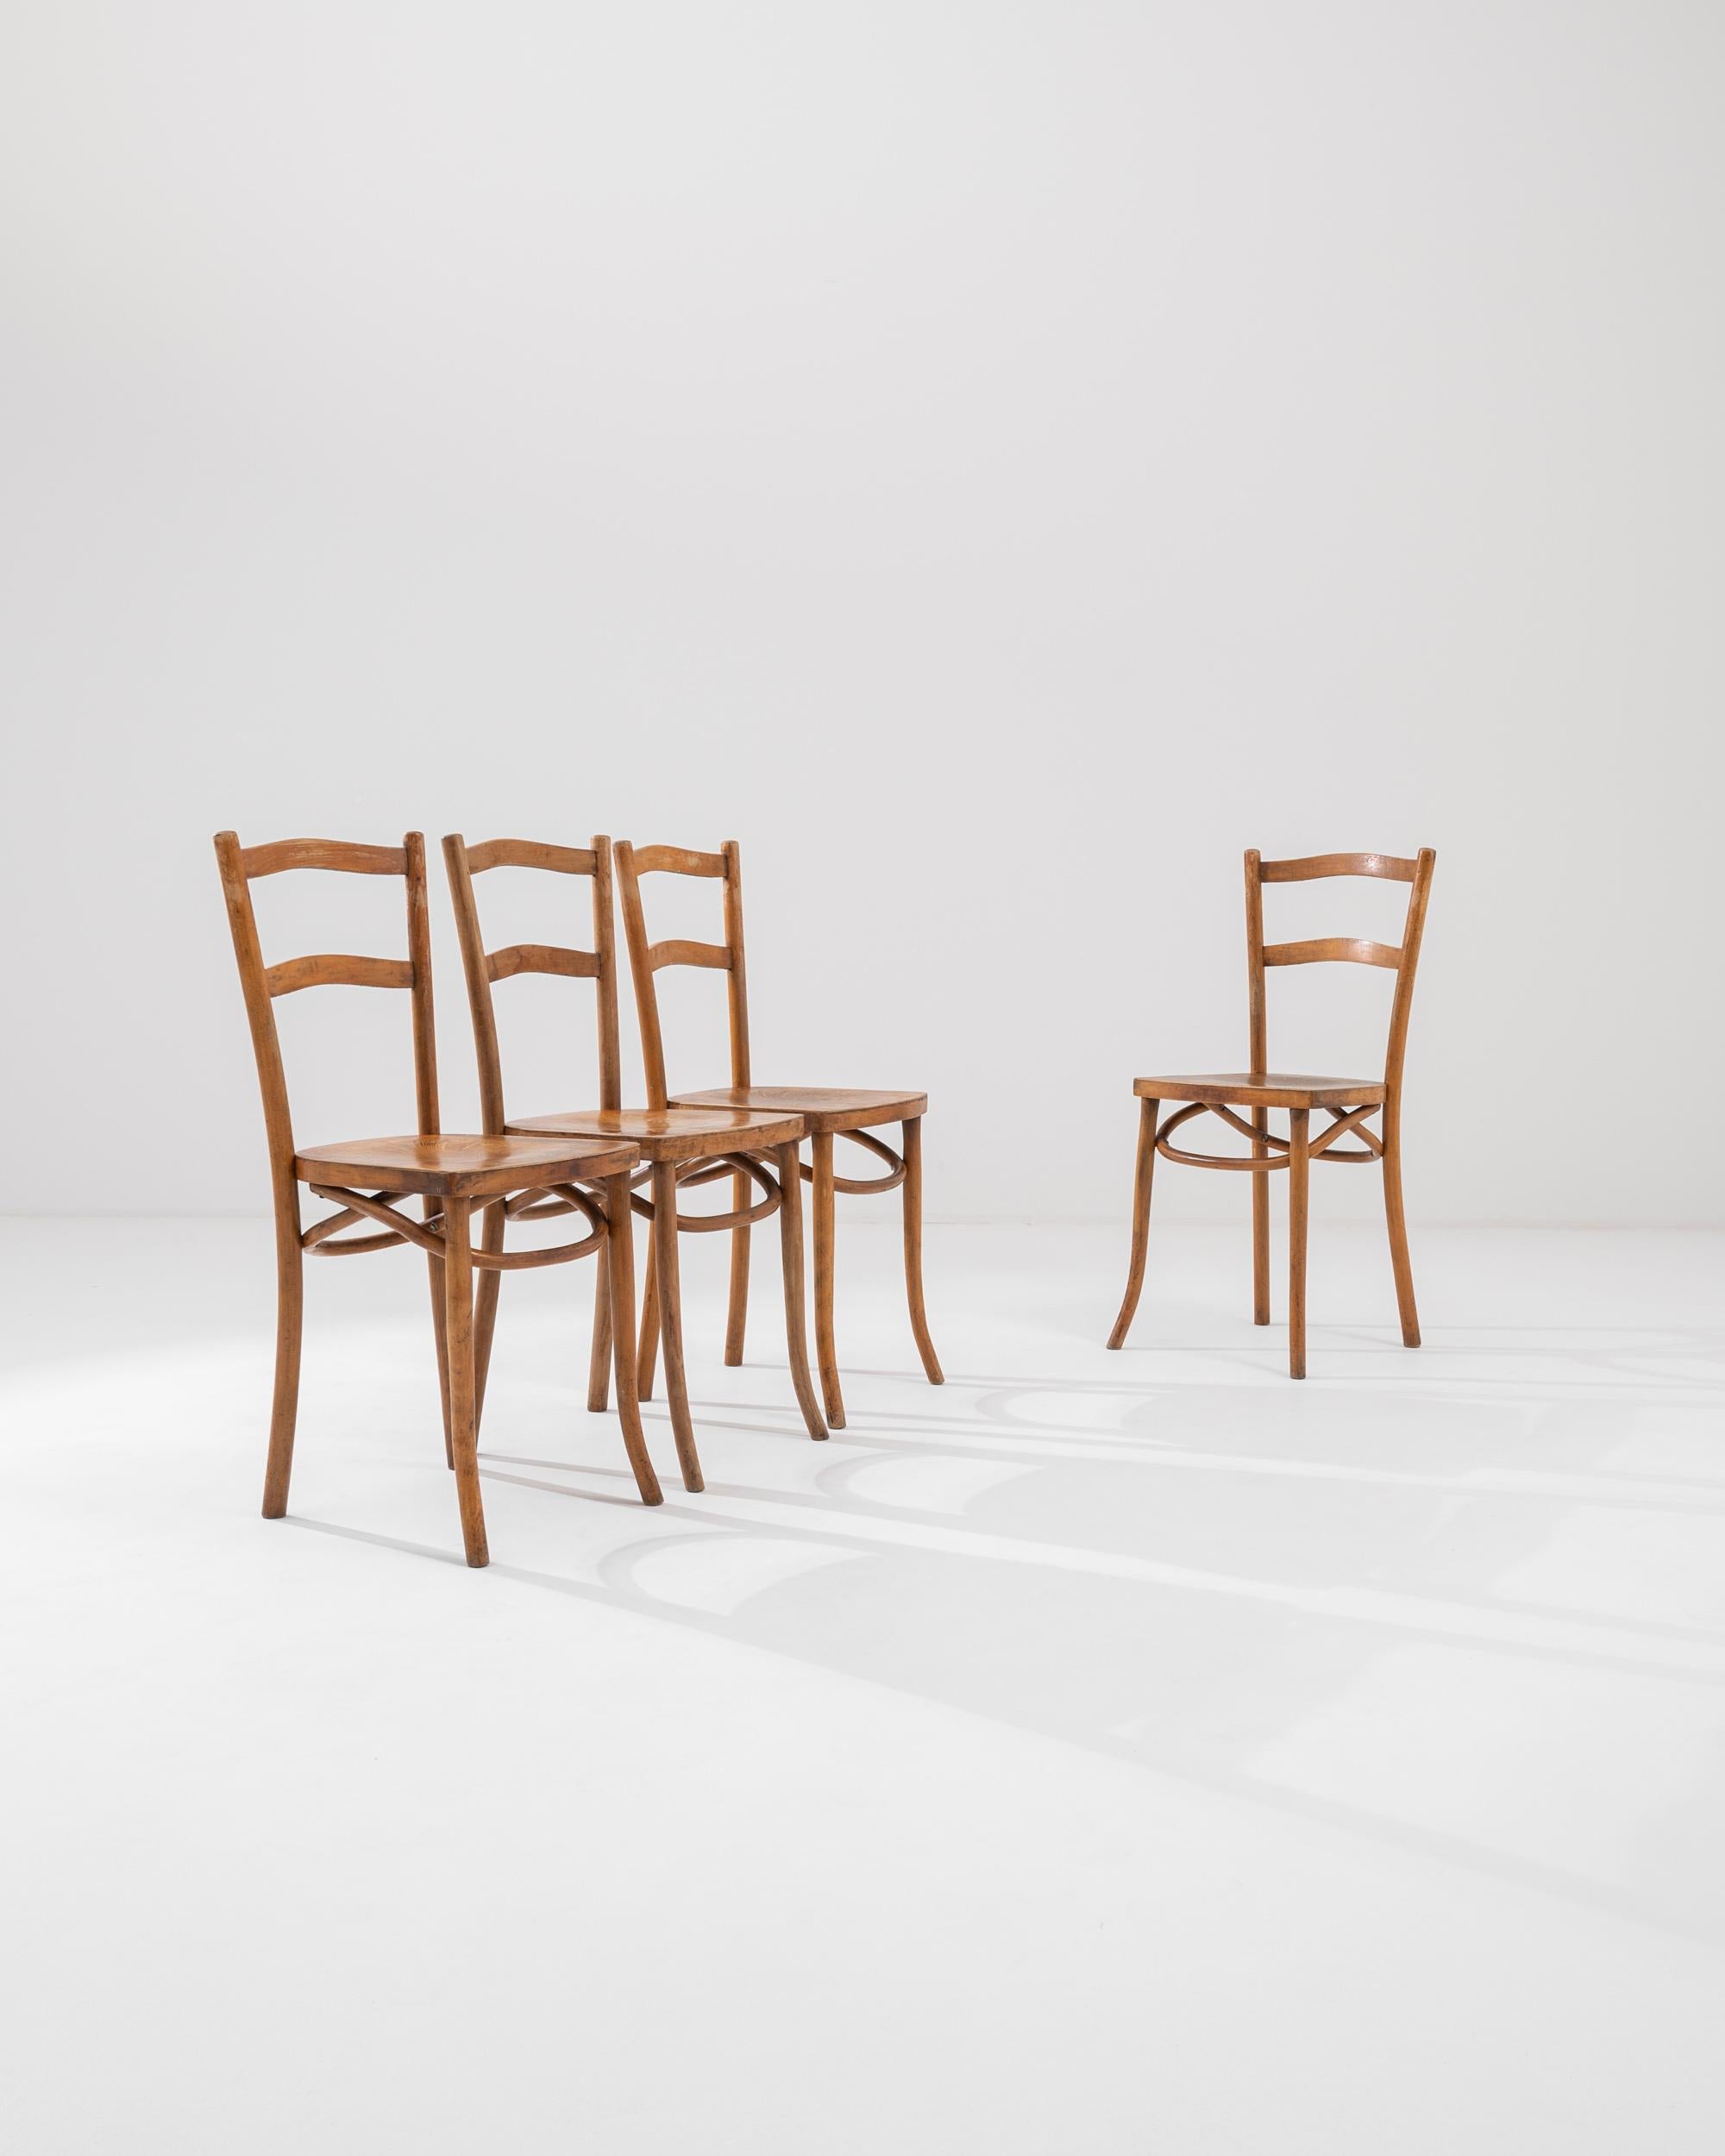 A set of wooden dining chairs created in 19th century France. Exuding an air of calm and elegance, this set of dining chairs gleam as a shining example of traditional french craftsmanship. Elegantly described scroll patterning decorates the seat of